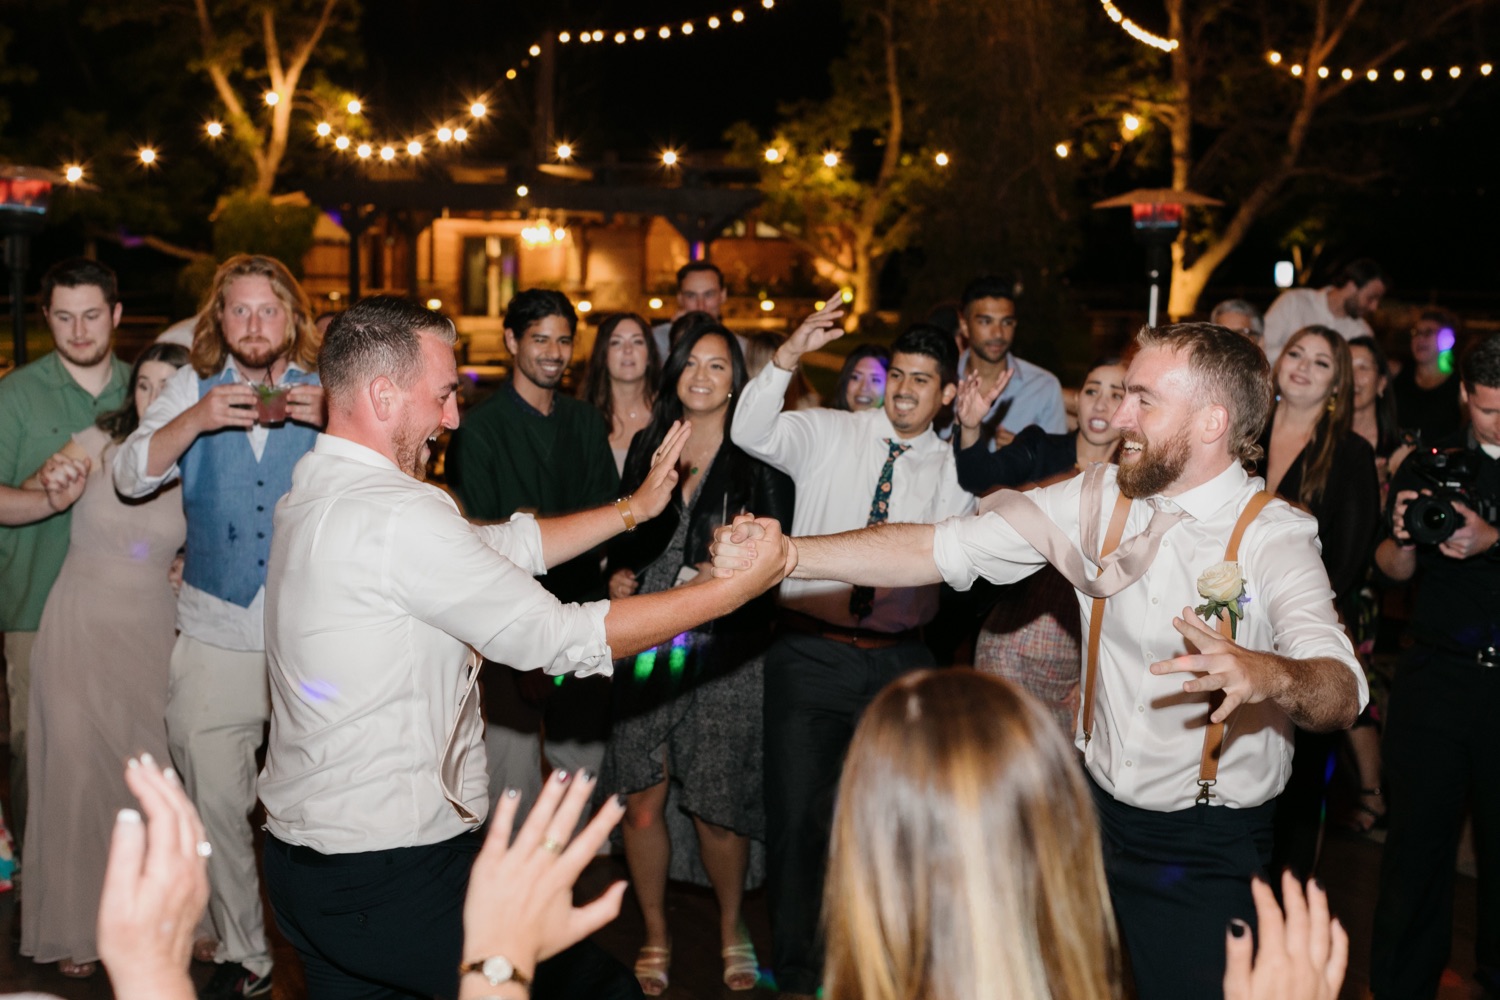 groom and his brother dancing together at walnut grove wedding reception